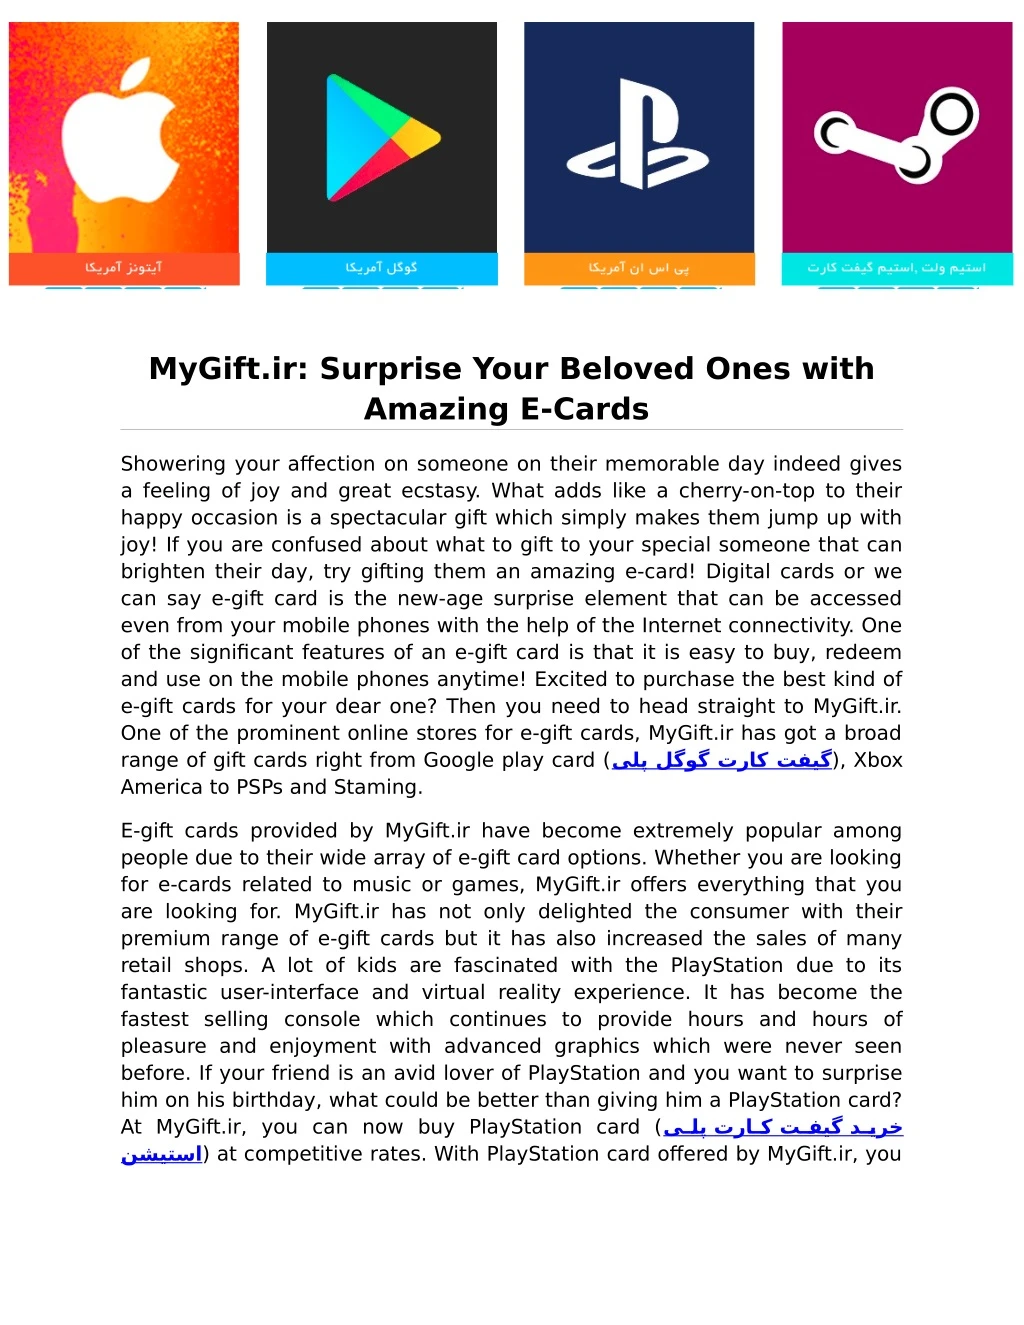 mygift ir surprise your beloved ones with amazing